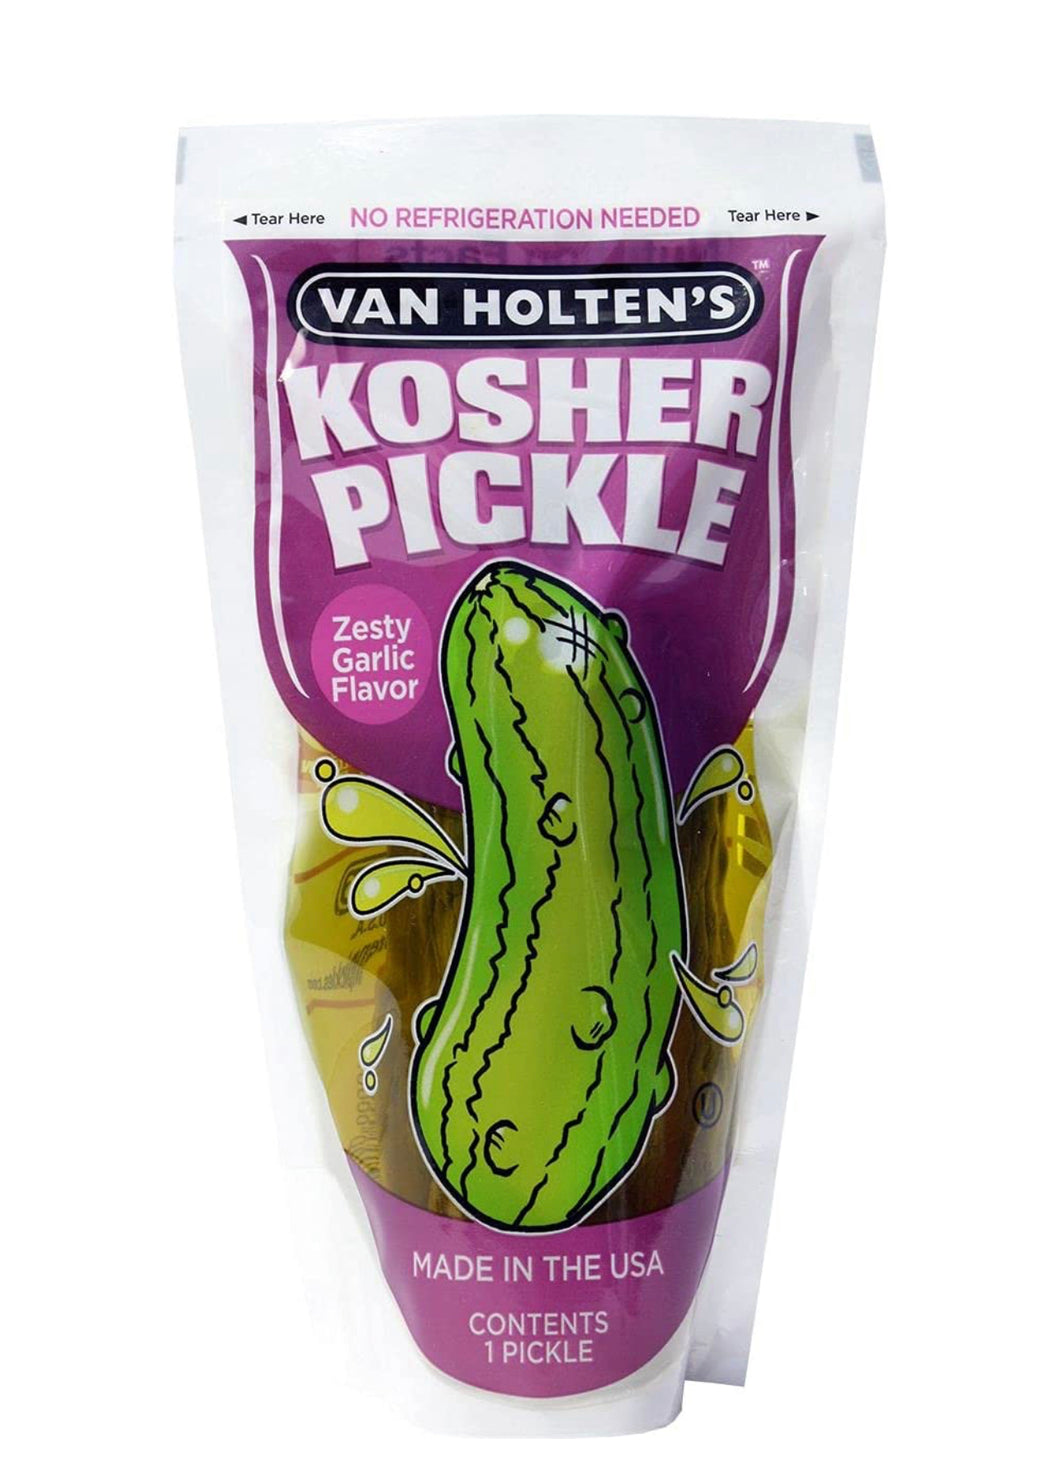 Pickle in a pouch Kosher